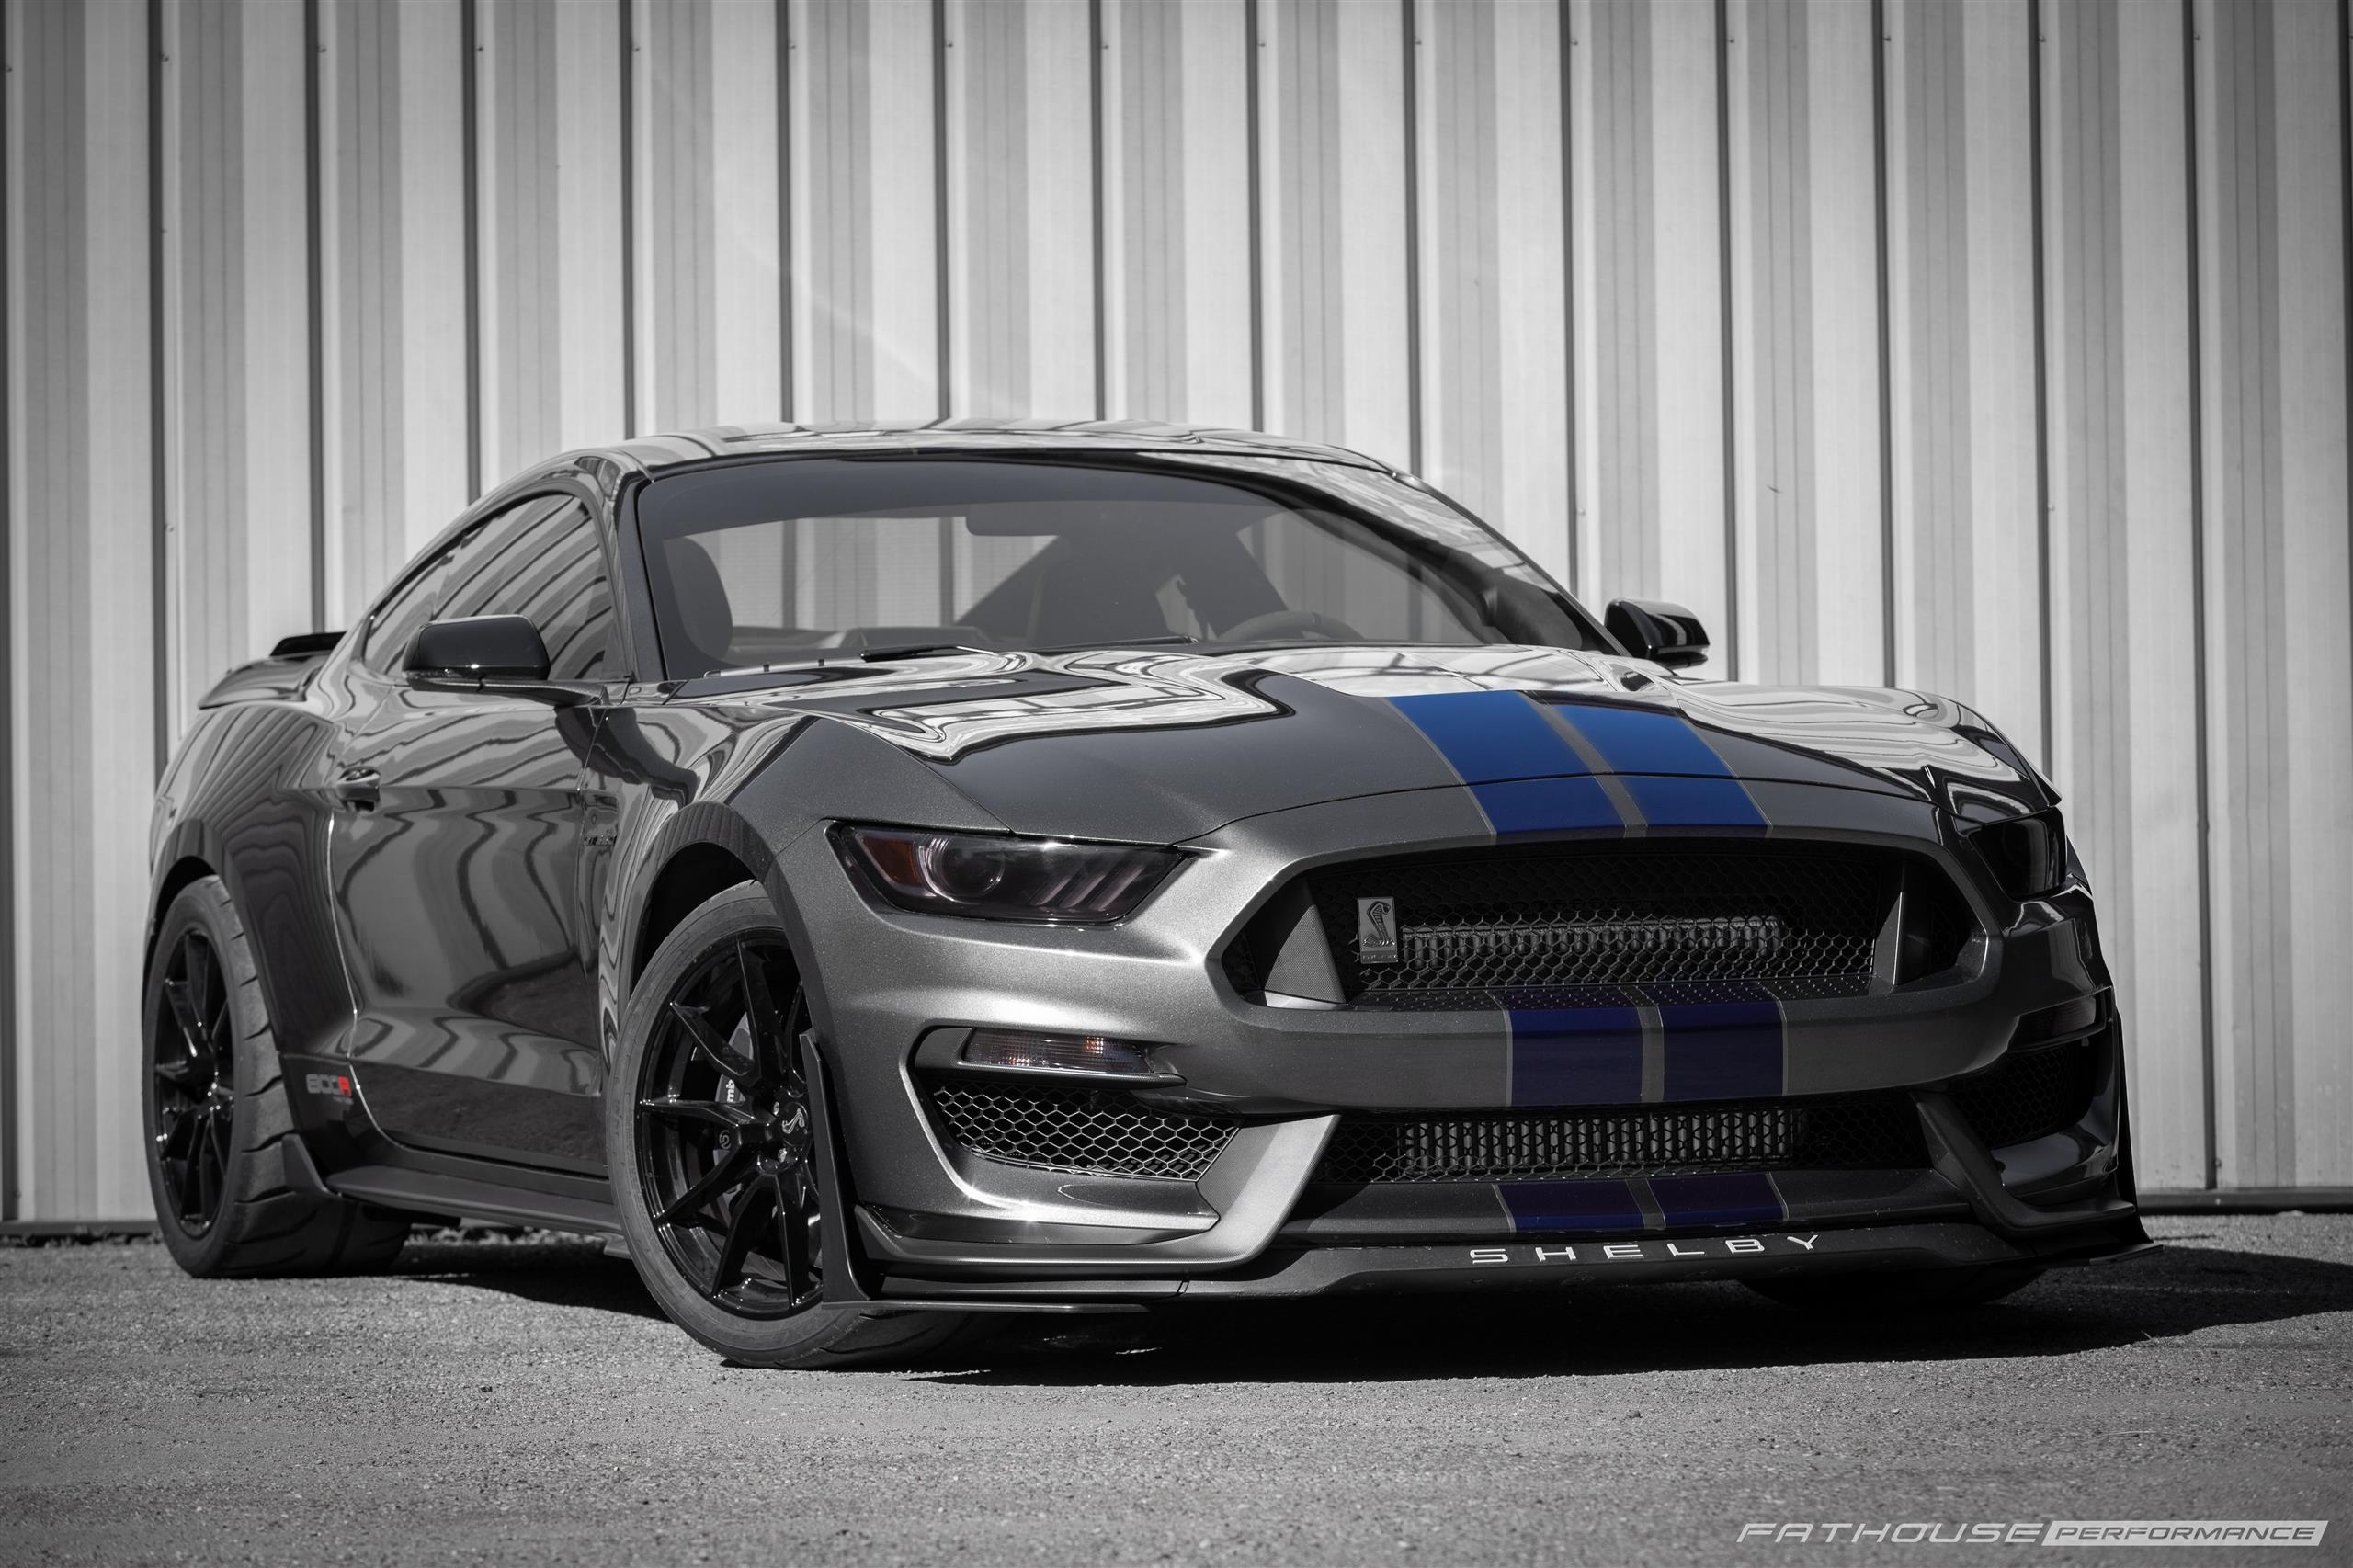 Grant’s 800R Shelby GT350 #47